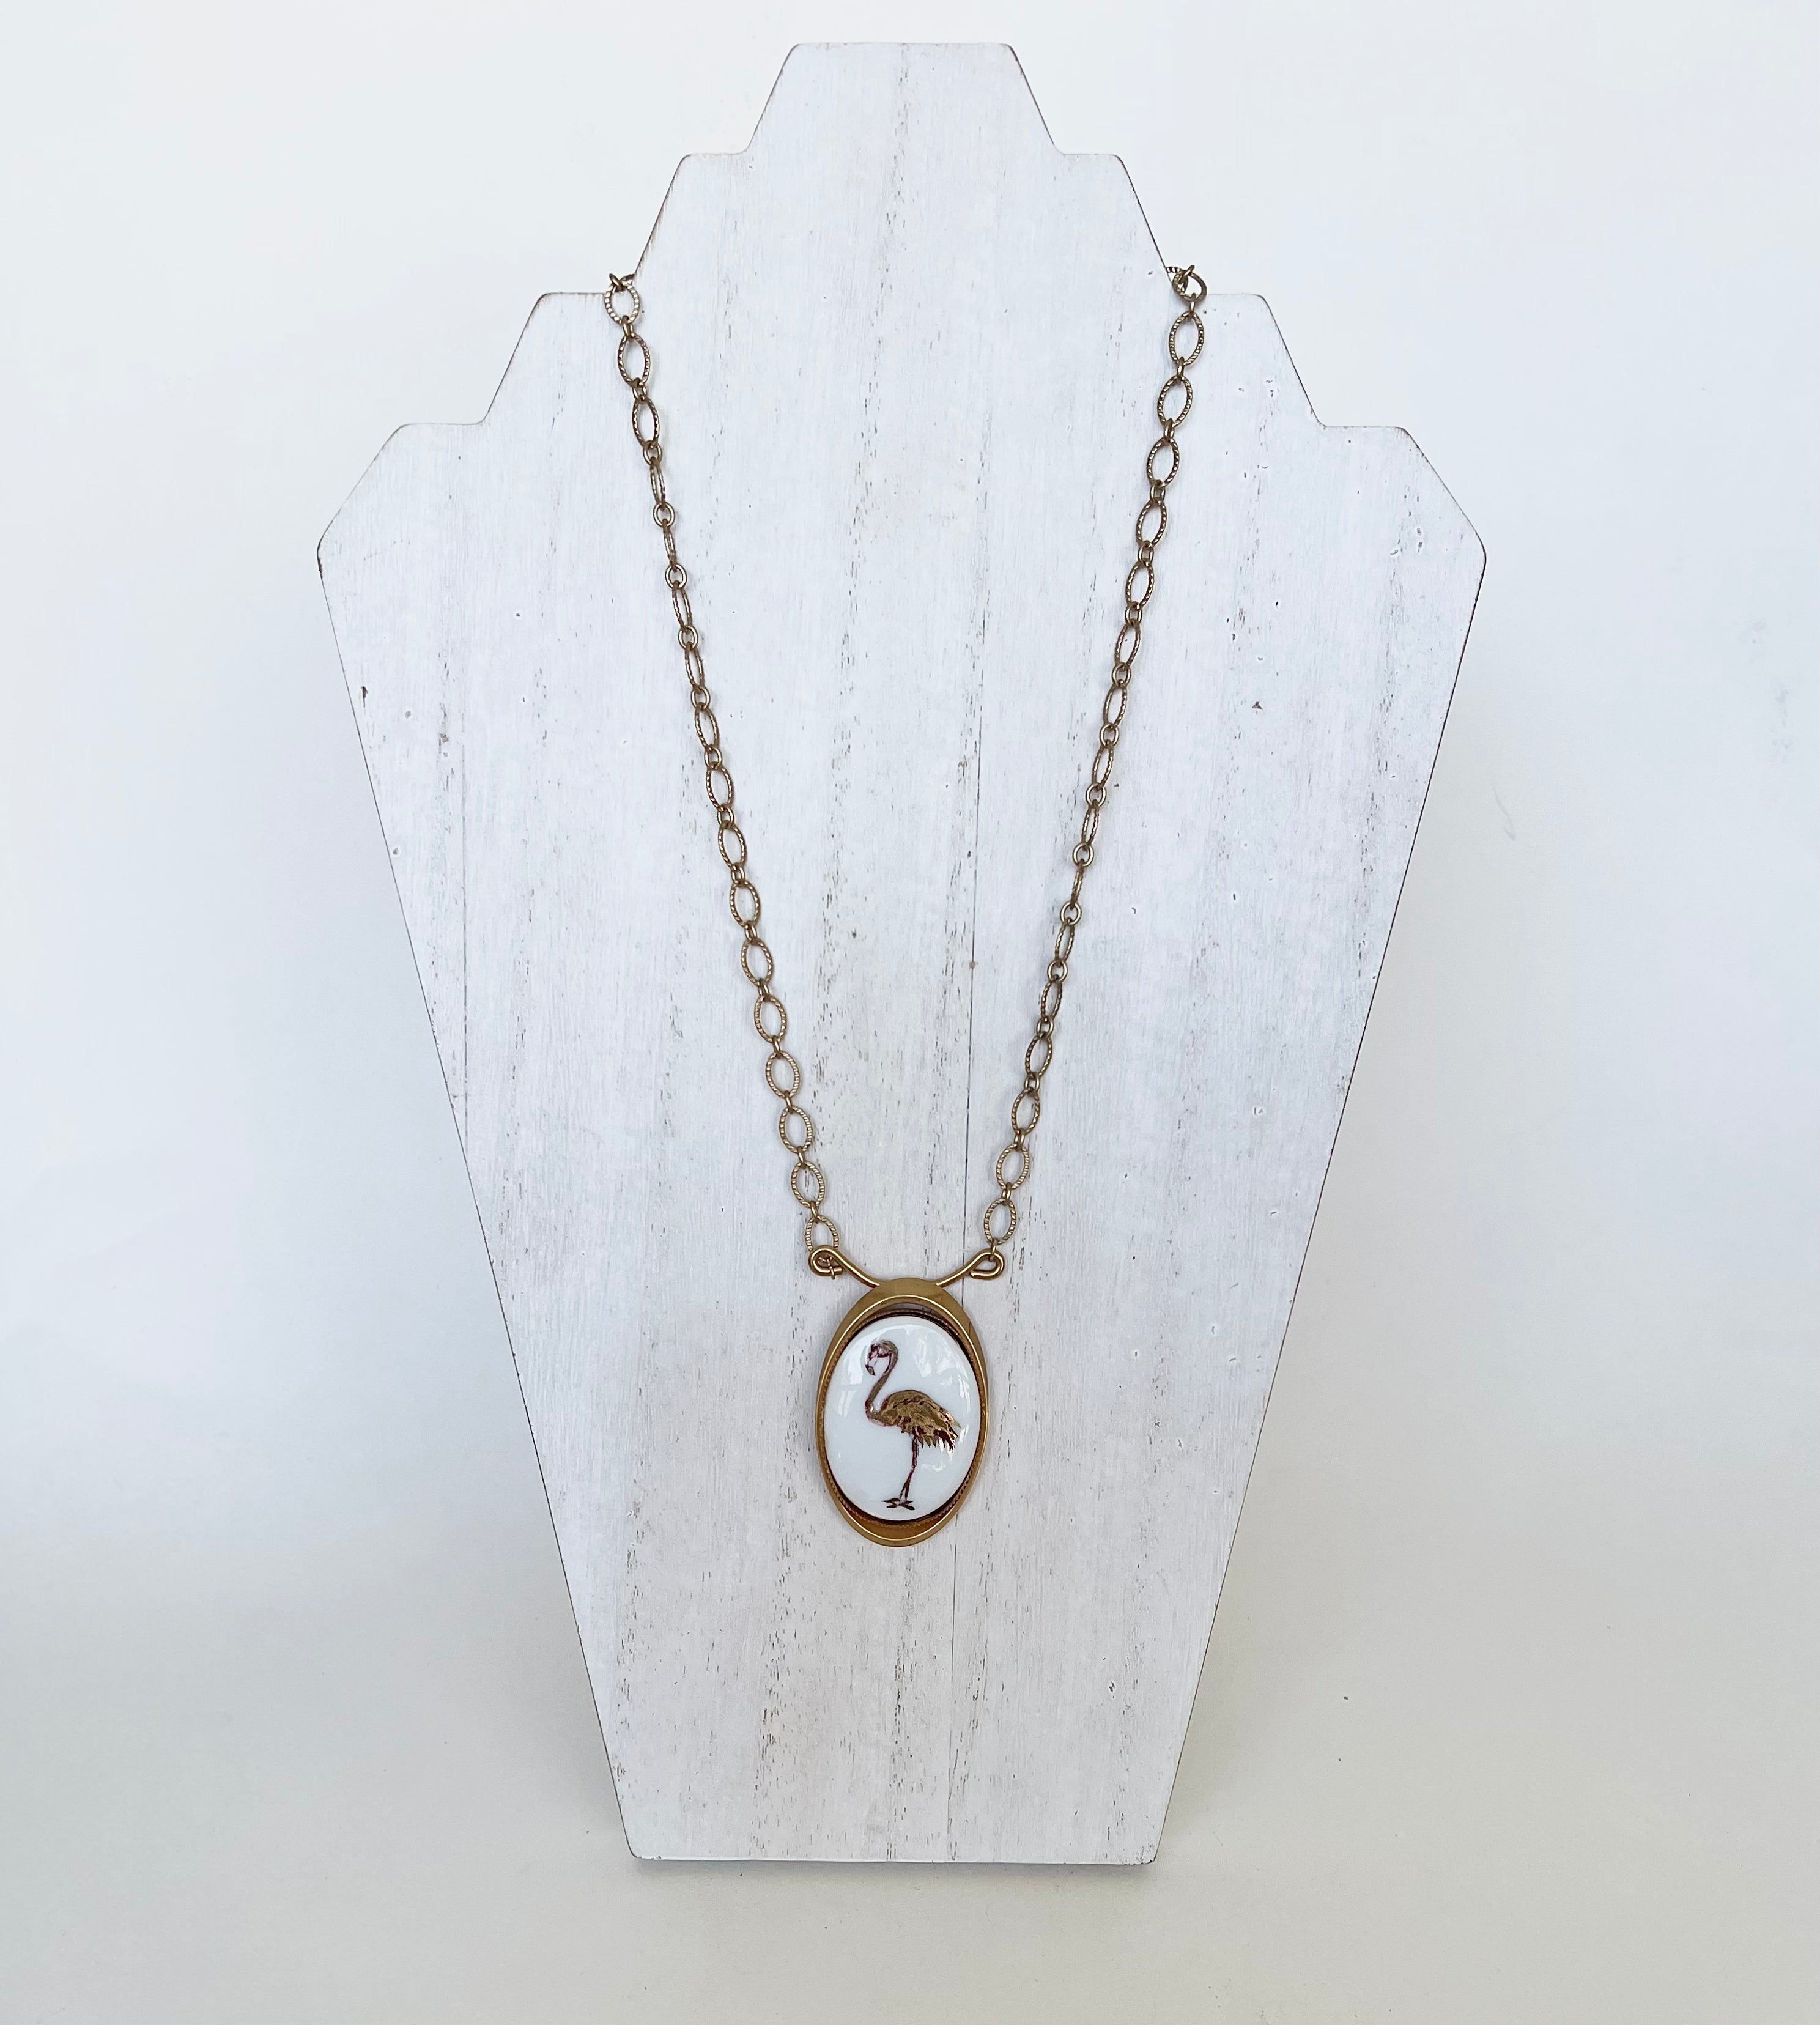 A gift, gift for that flamingo lover, Golden Flamingo Necklace